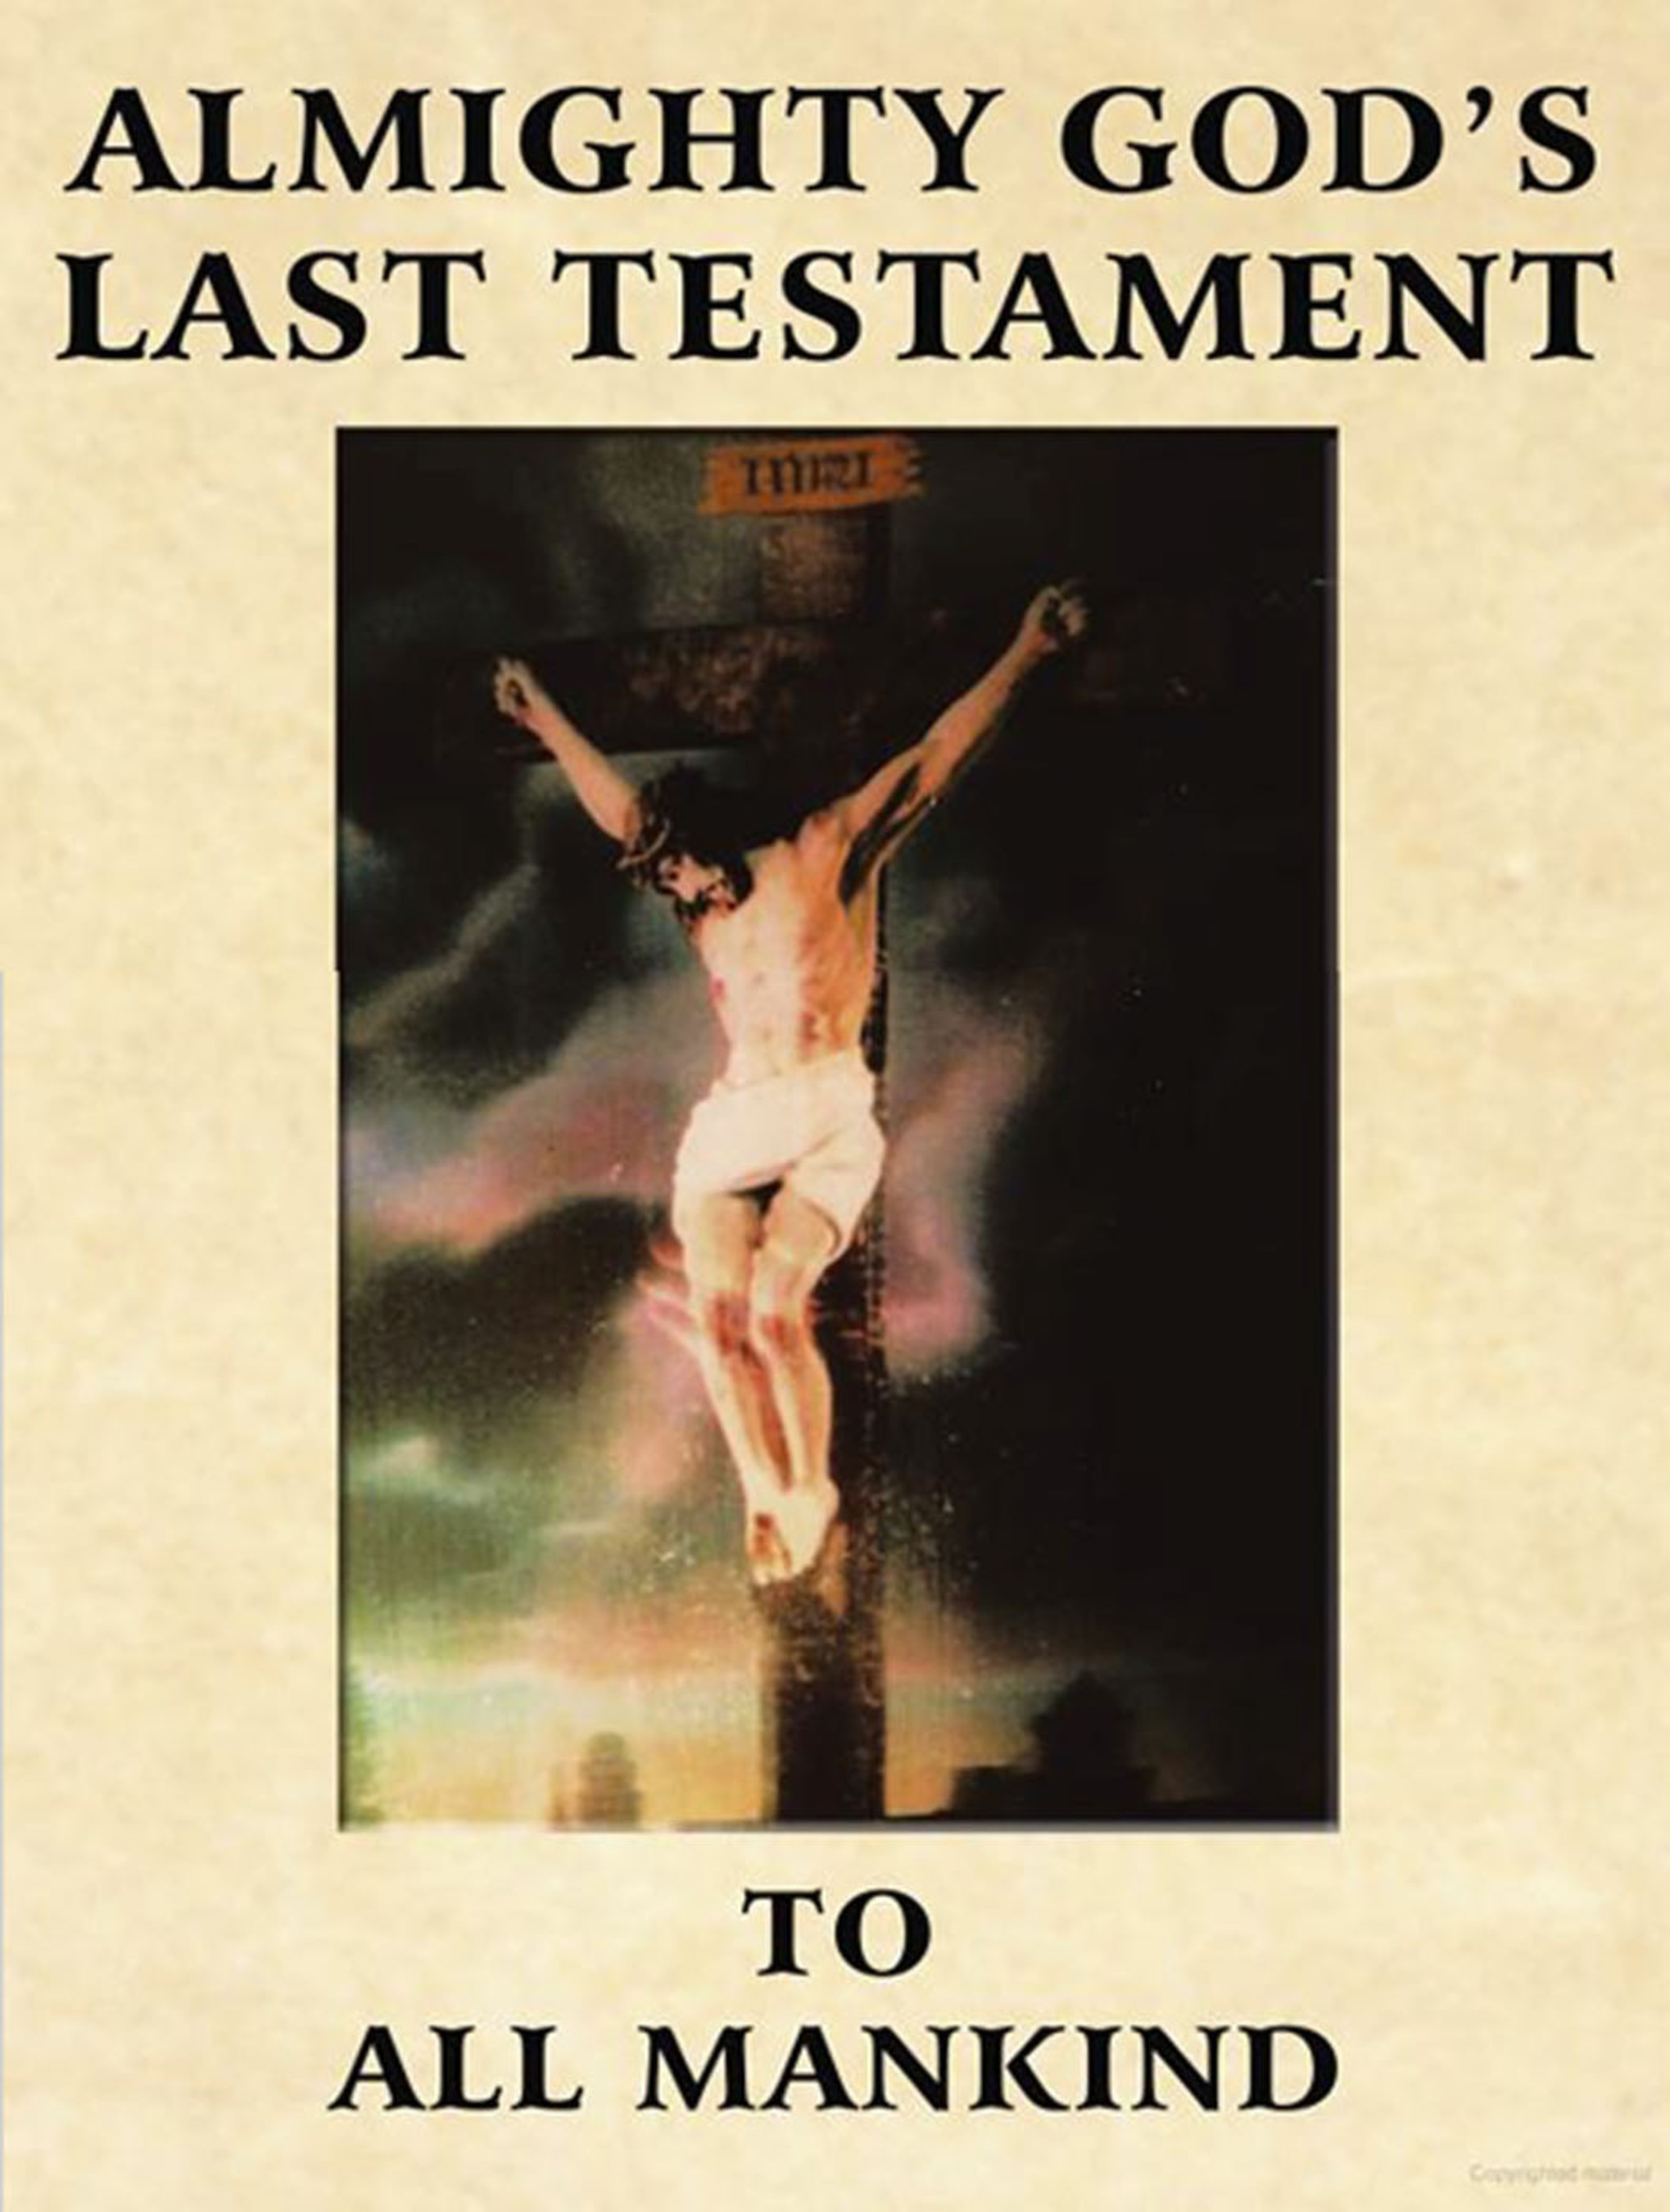 Almighty God's Last Testament to All Mankind. (PRNewsFoto/Archway Publishing) (PRNewsFoto/ARCHWAY PUBLISHING)